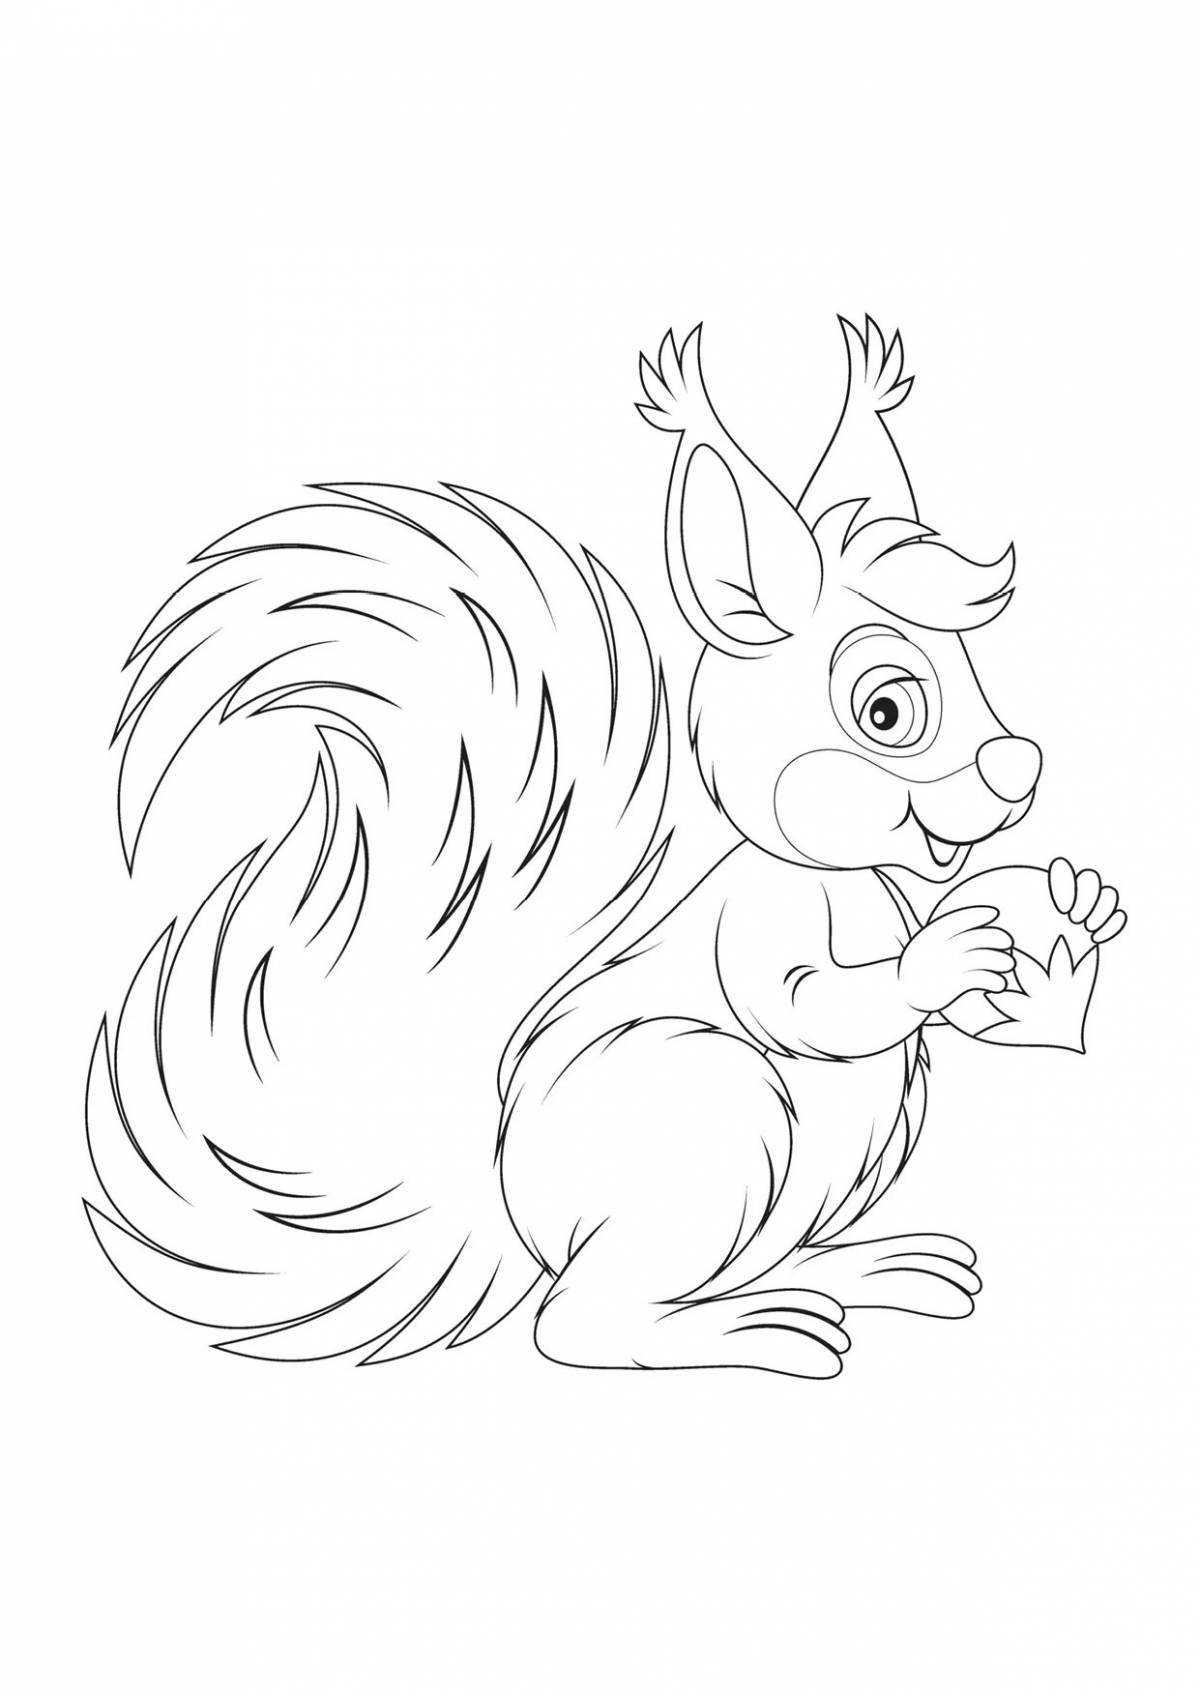 Squirrel playful coloring book for 2-3 year olds